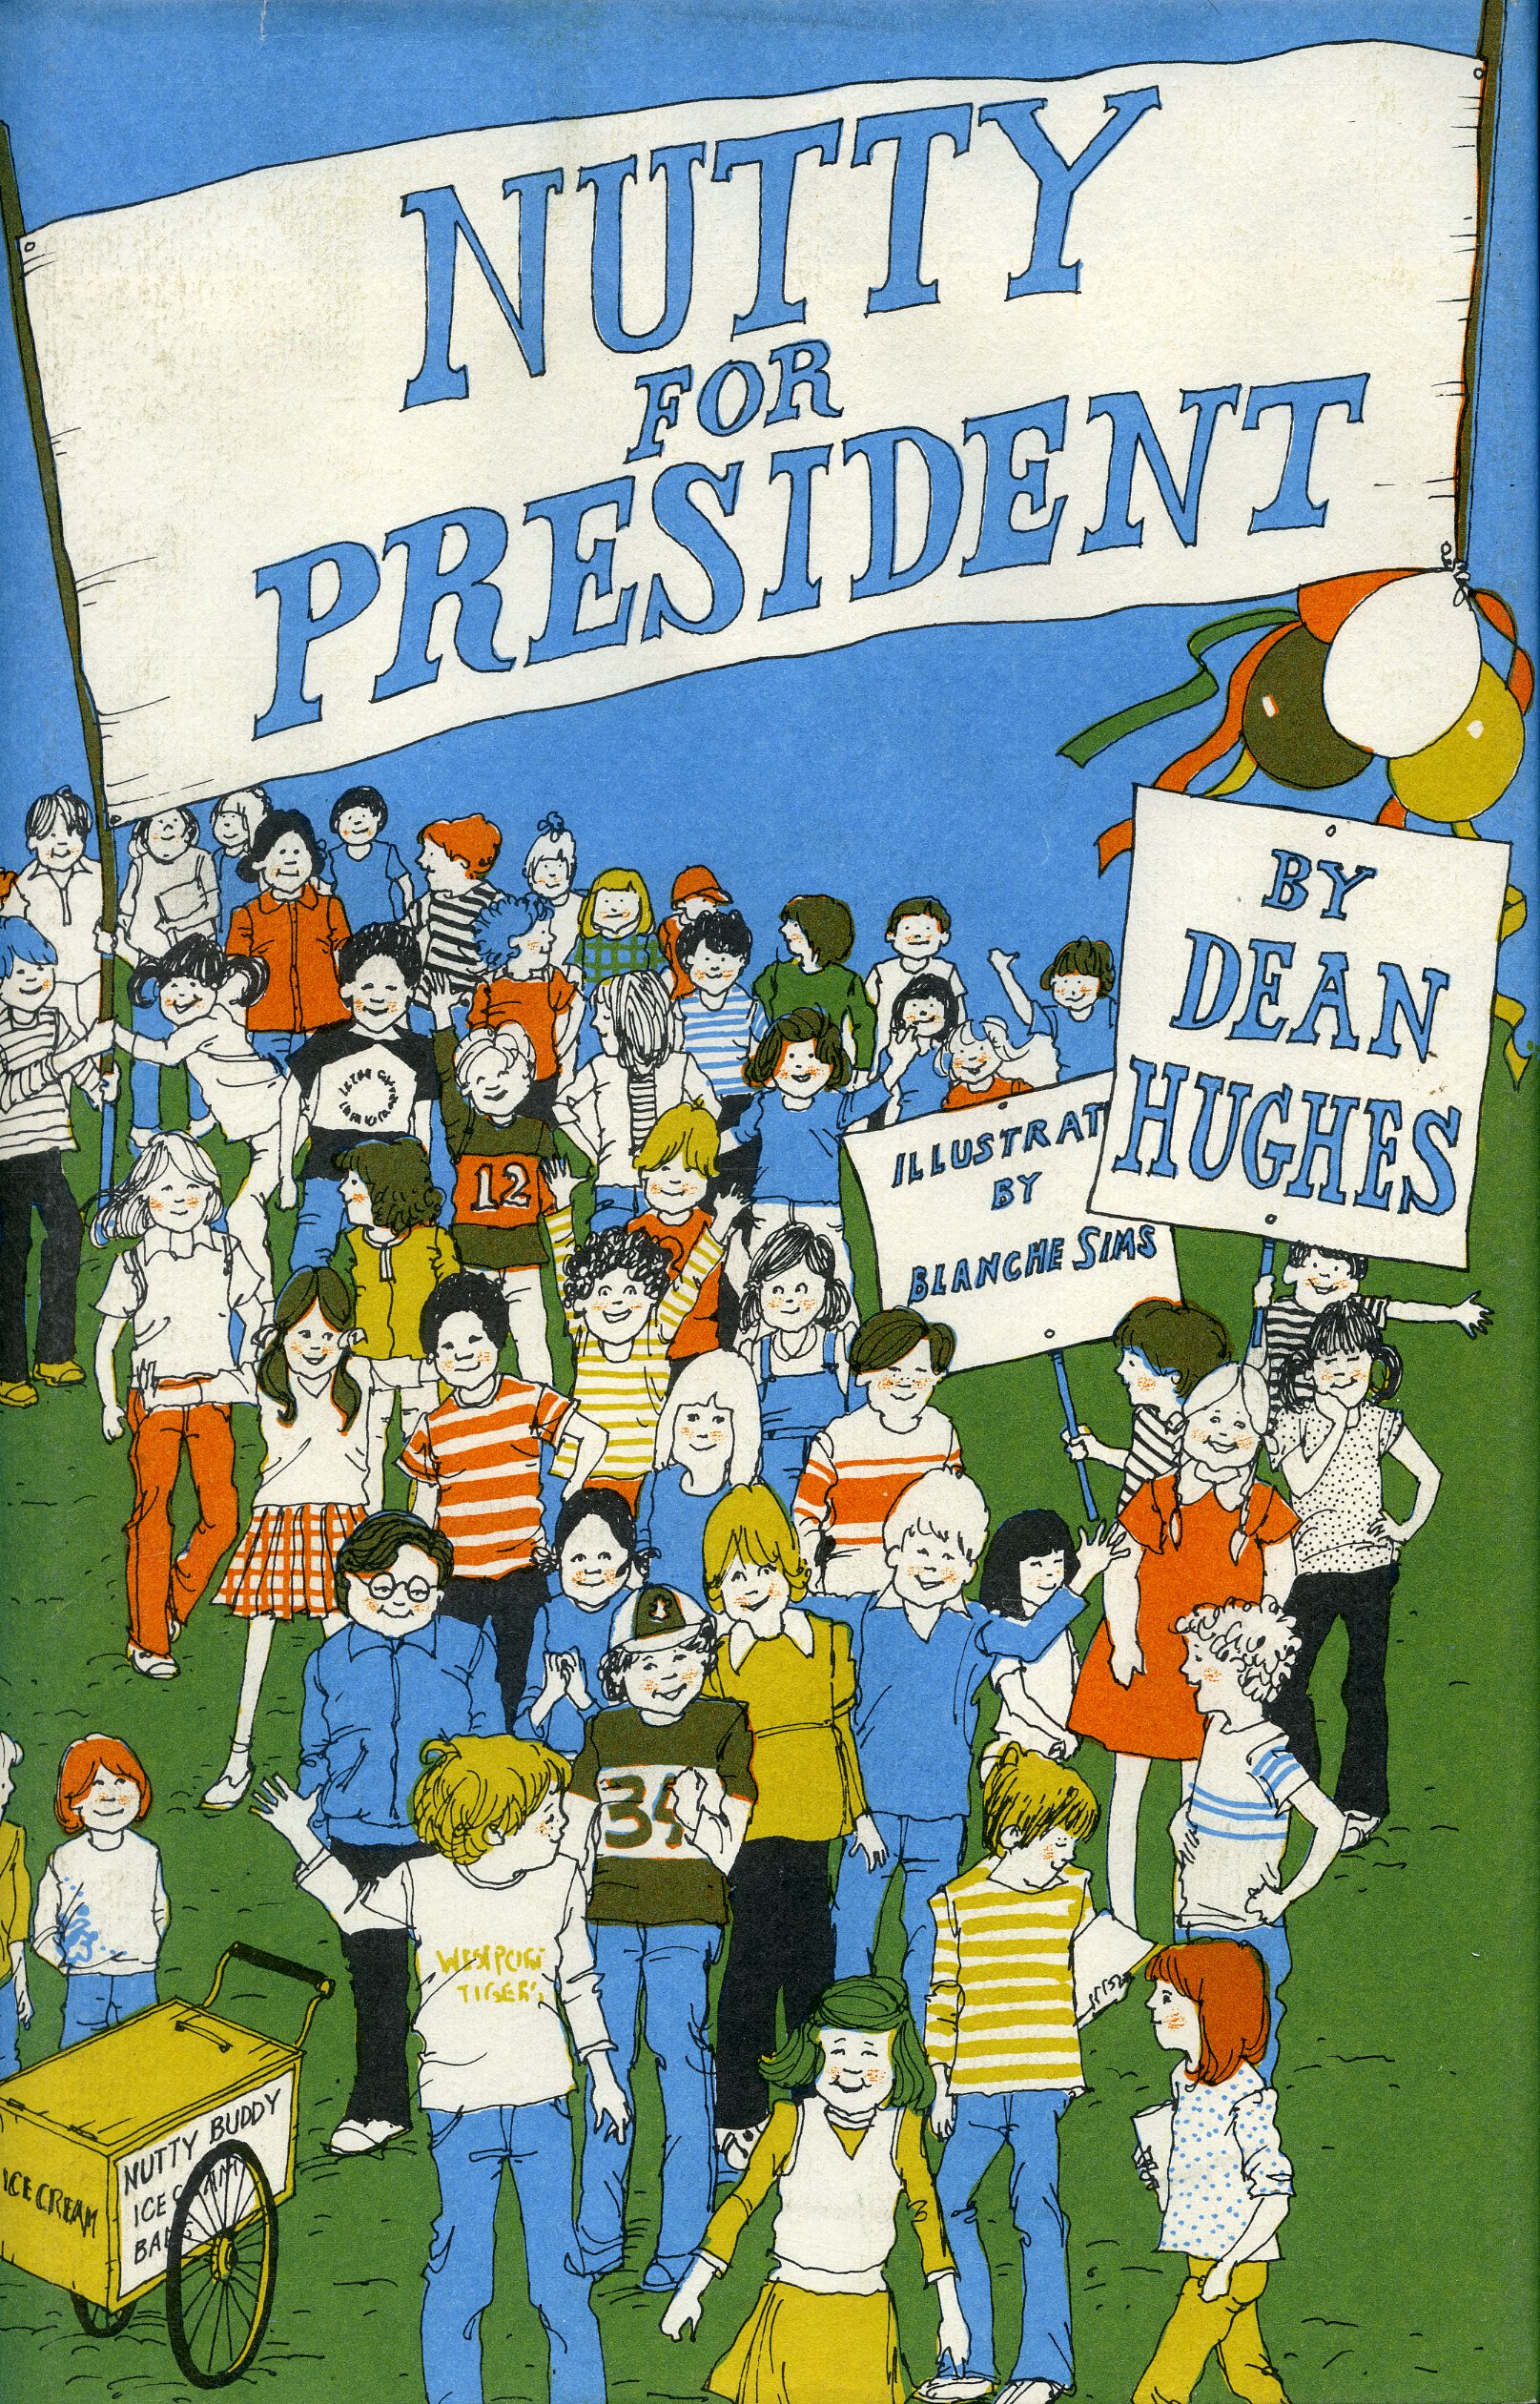 Nutty for President by Dean Hughes